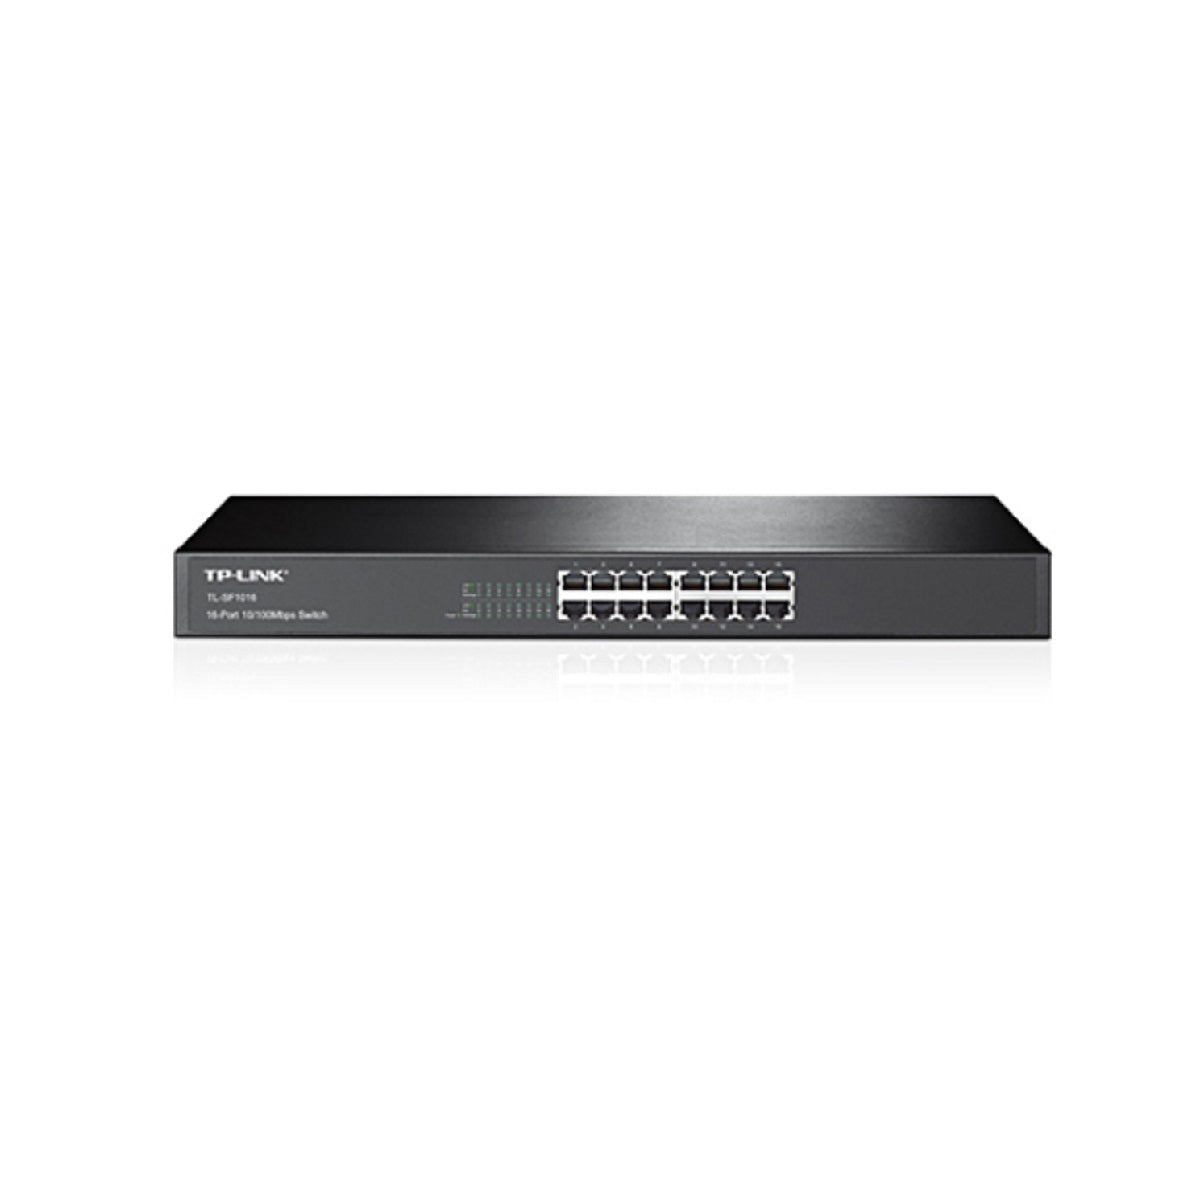 TP-LINK TL-SF1016 16-Port Unmanaged Rackmount Fast Ethernet Switch